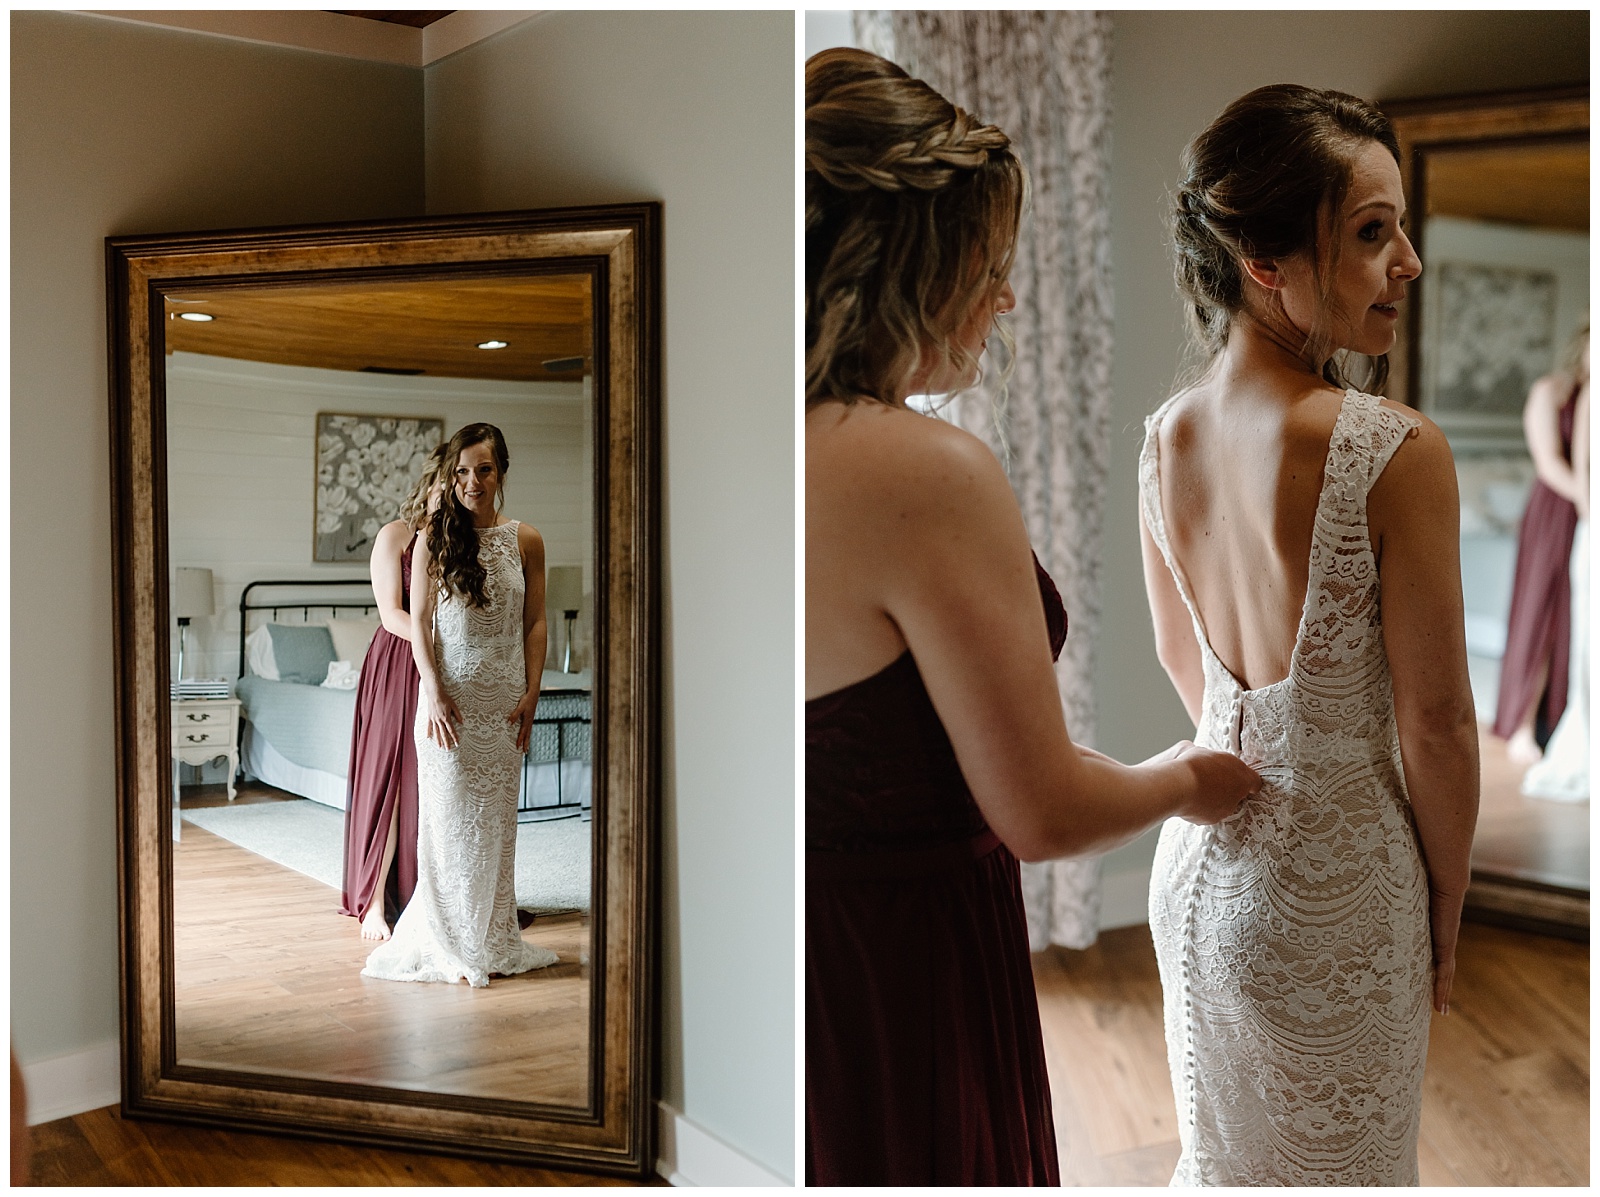 A bridesmaid helps zip up the back of a lacey fitted bridal gown while the bride looks at her appearance in a full length mirror in front of them.